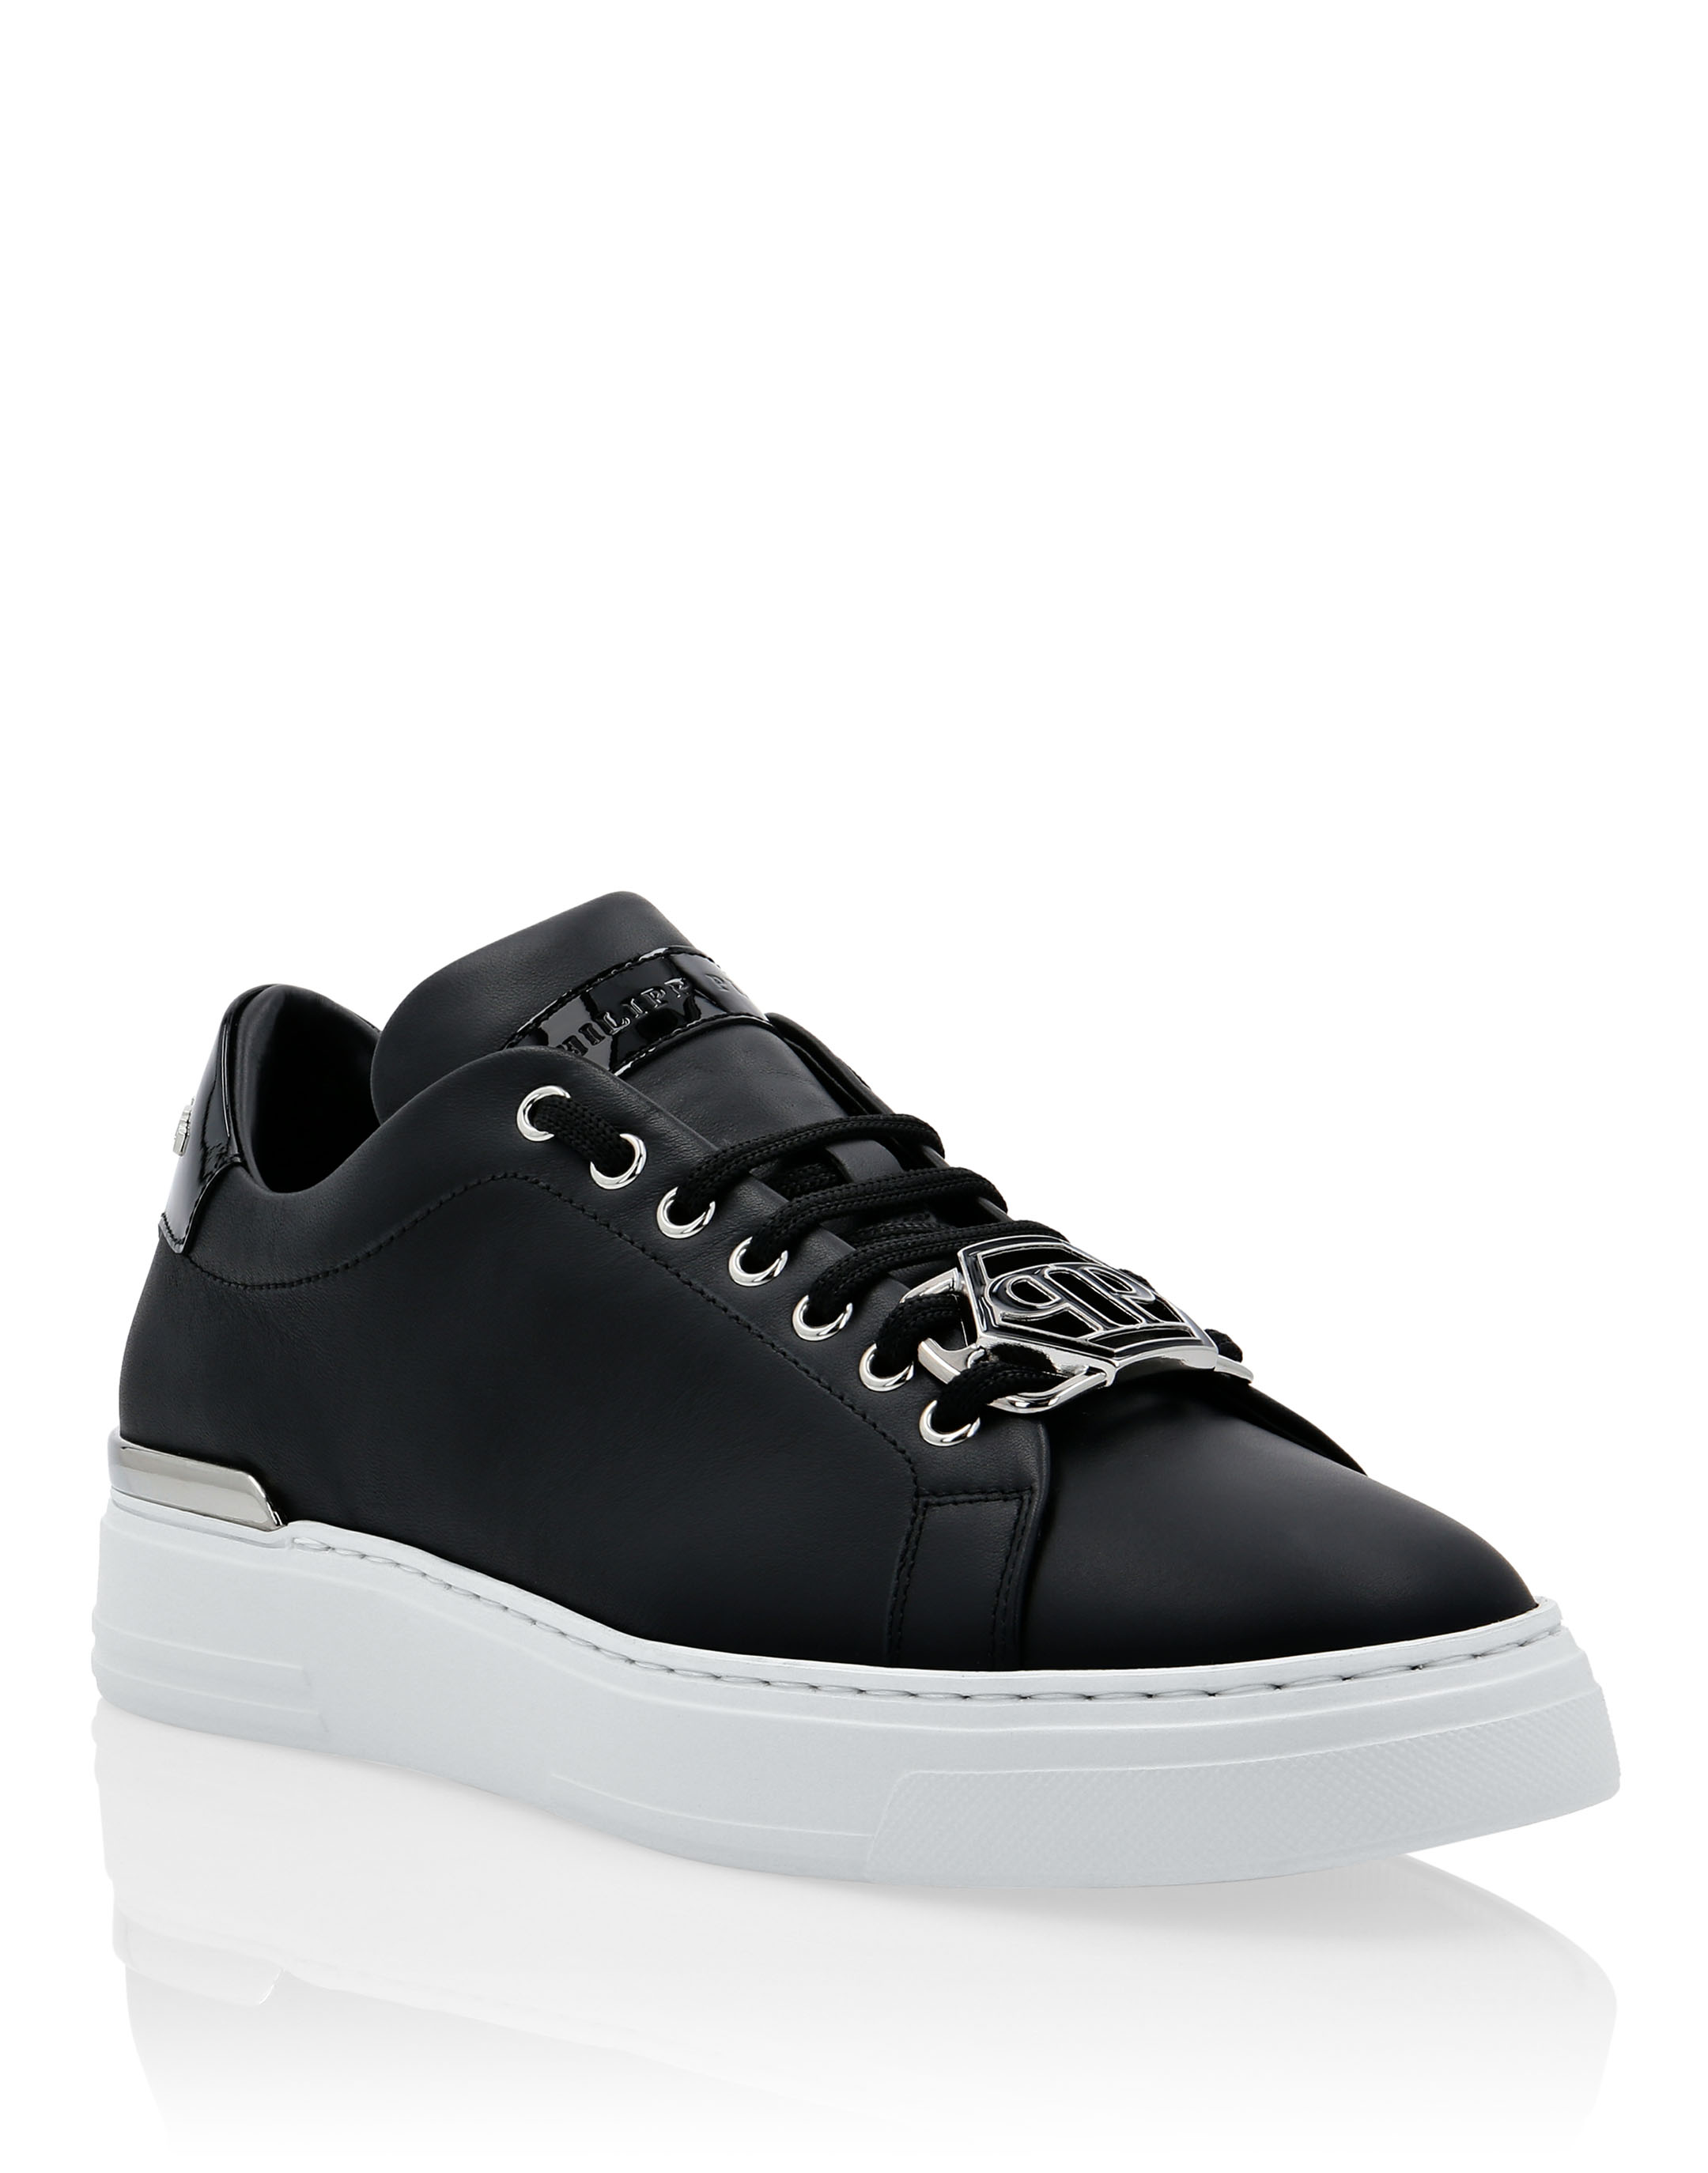 mens sneakers with Sporty Henri | Runner's World | 15 x Pigalle låga  sneakers